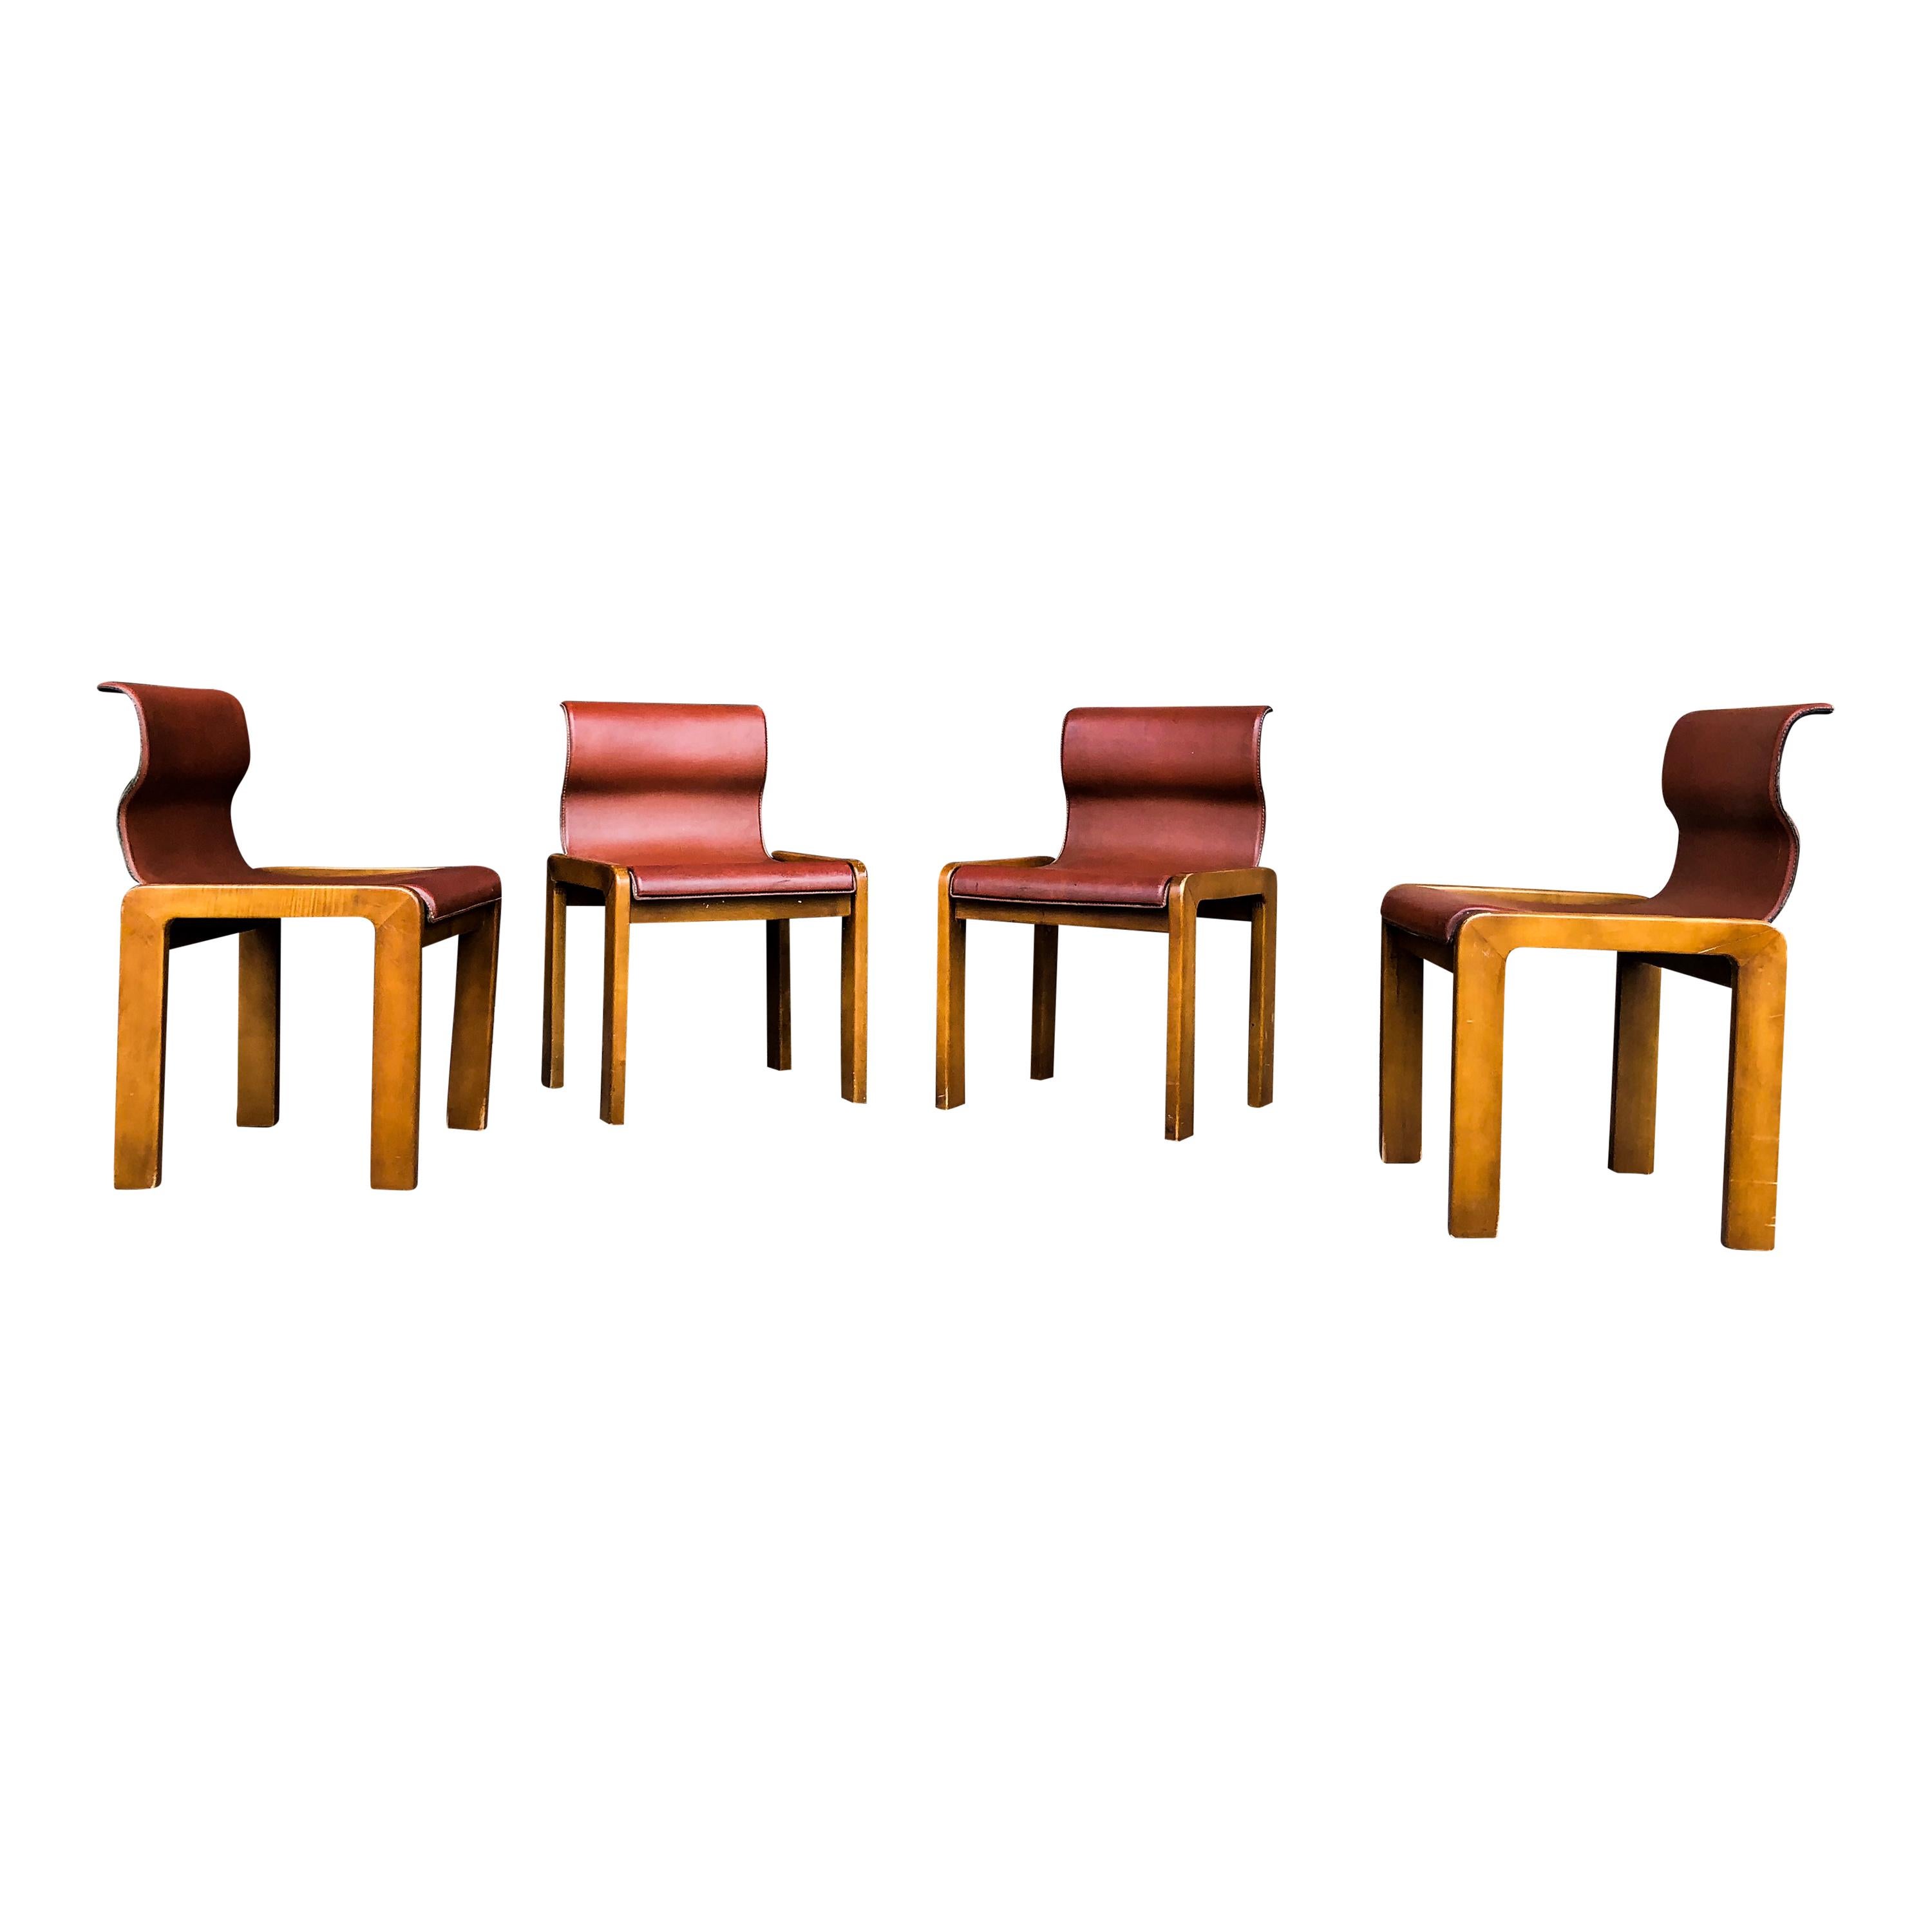 Mid-20th Century Afra & Tobia Scarpa Midcentury Leather and Plywood Dining Chair, 1966, Set of 4 For Sale